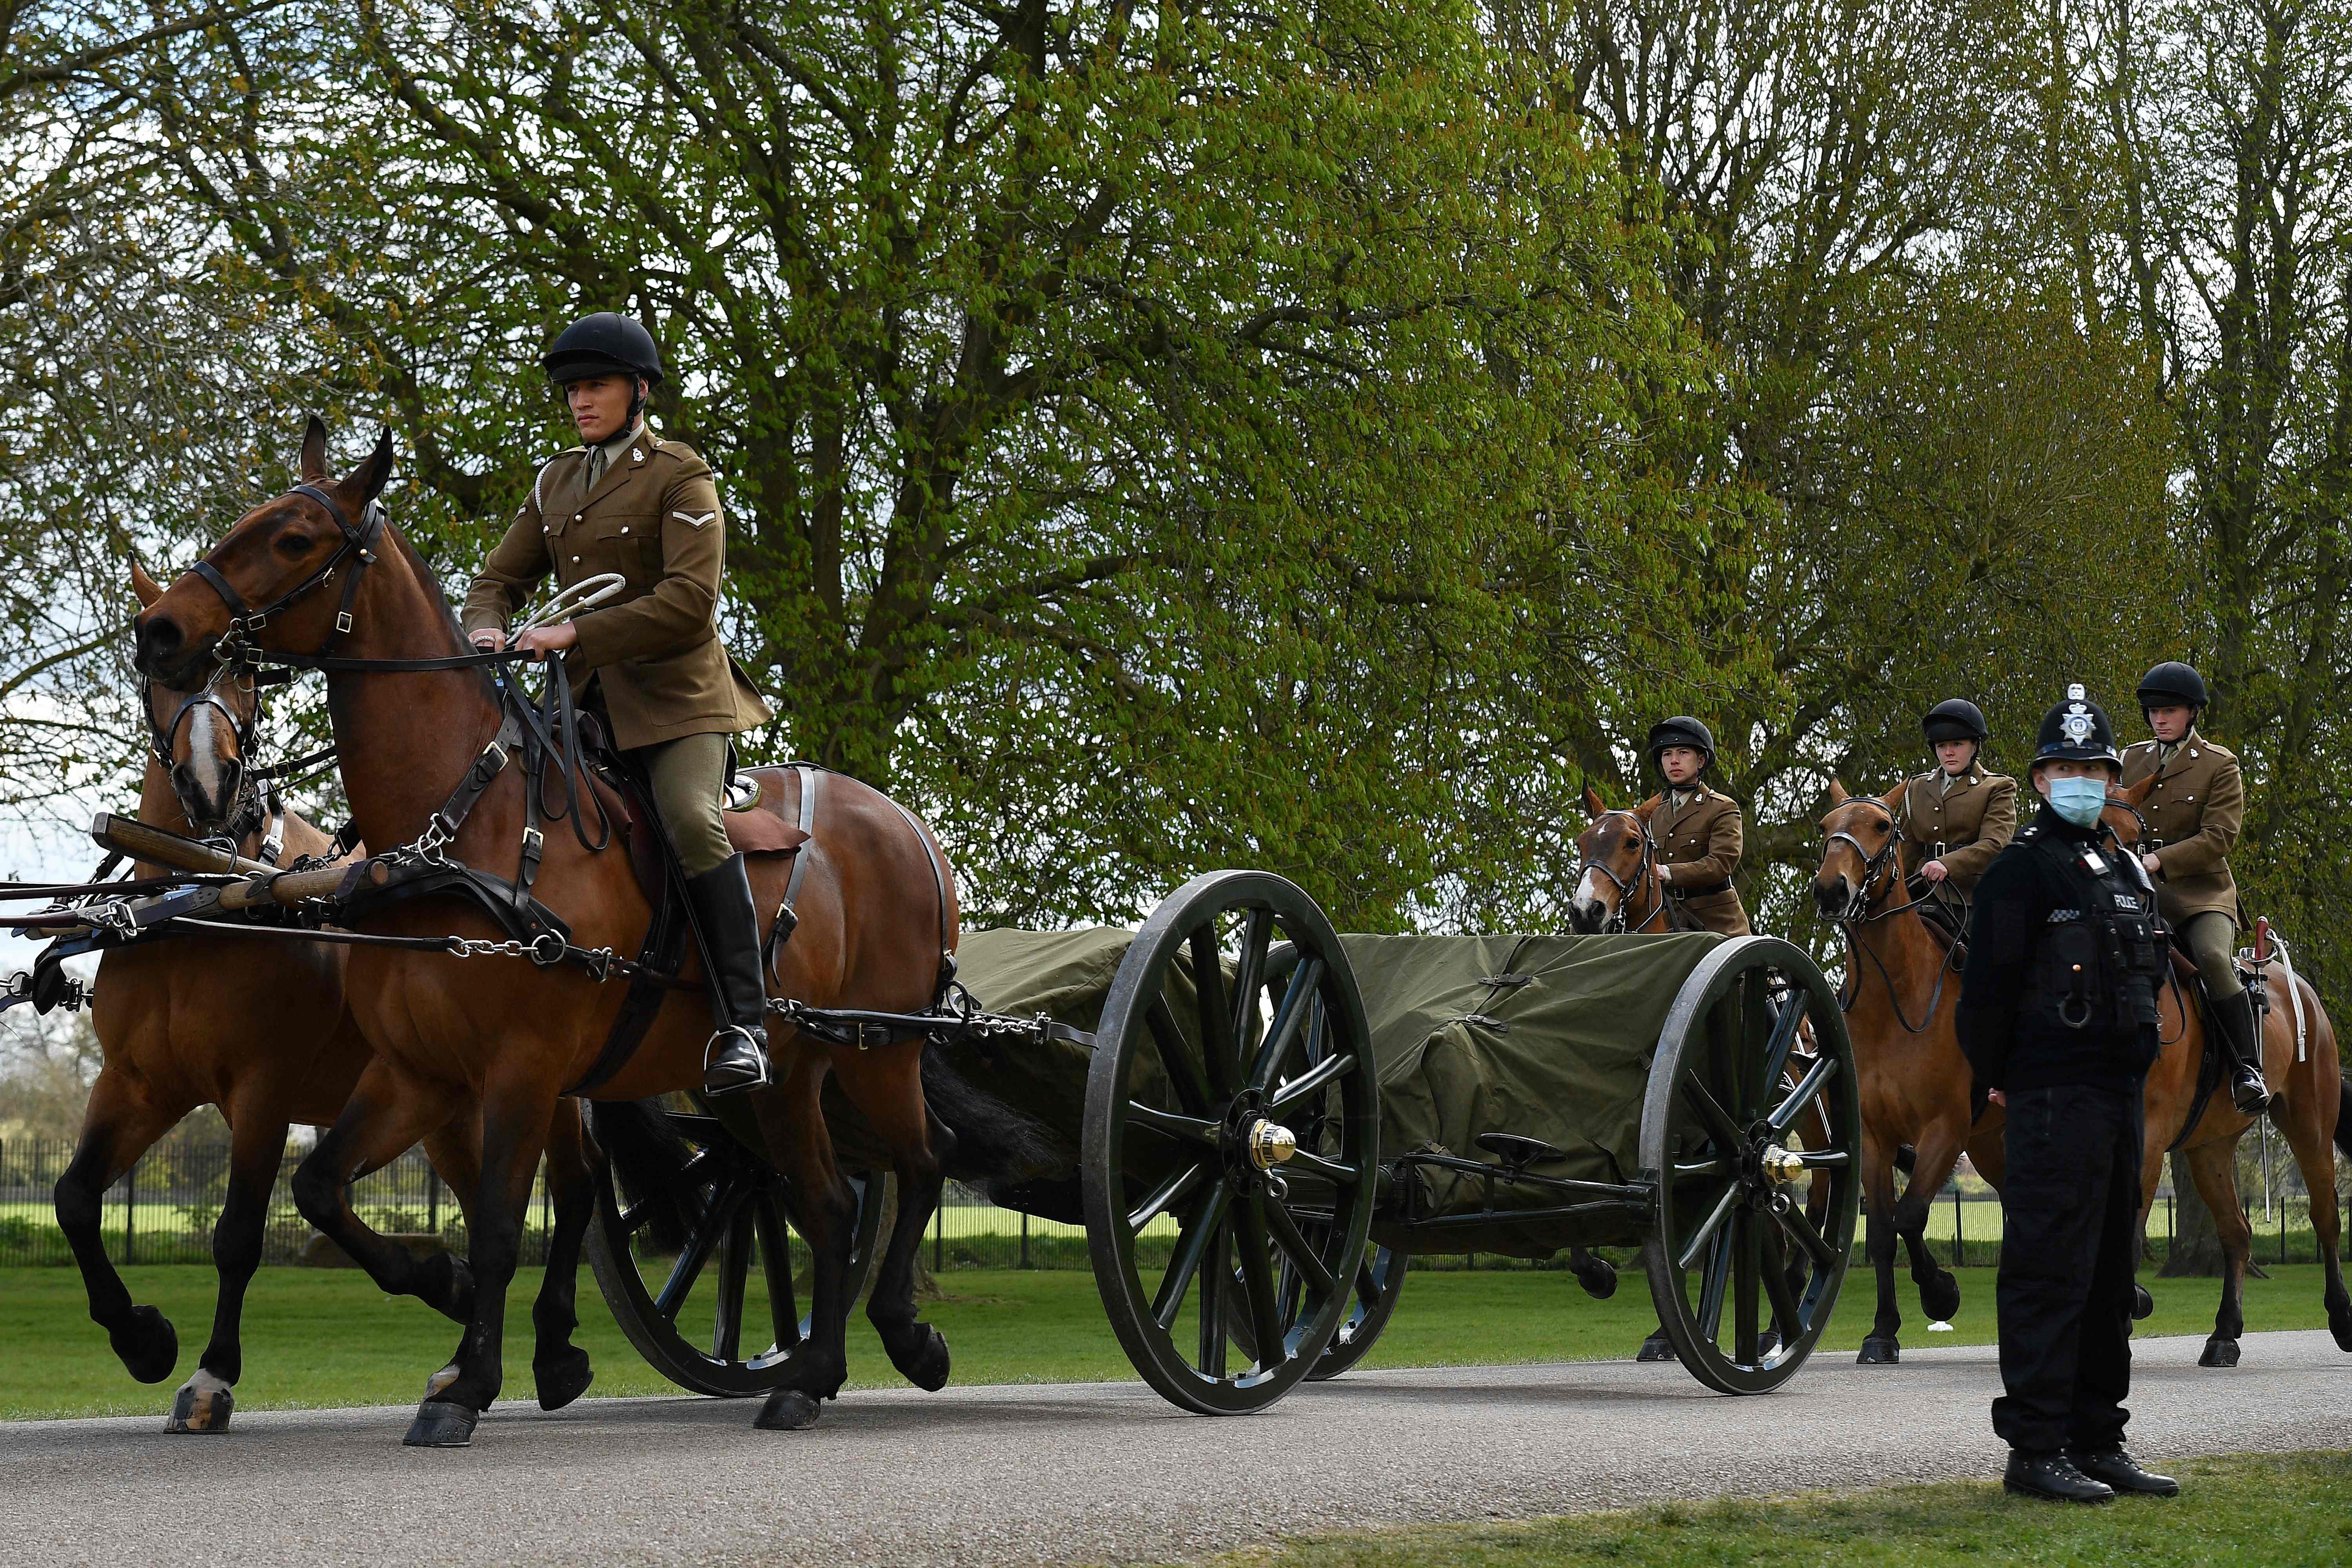 Members of the Household Cavalry Mounted Regiment ride their horses into the grounds of Windsor Castle in Windsor